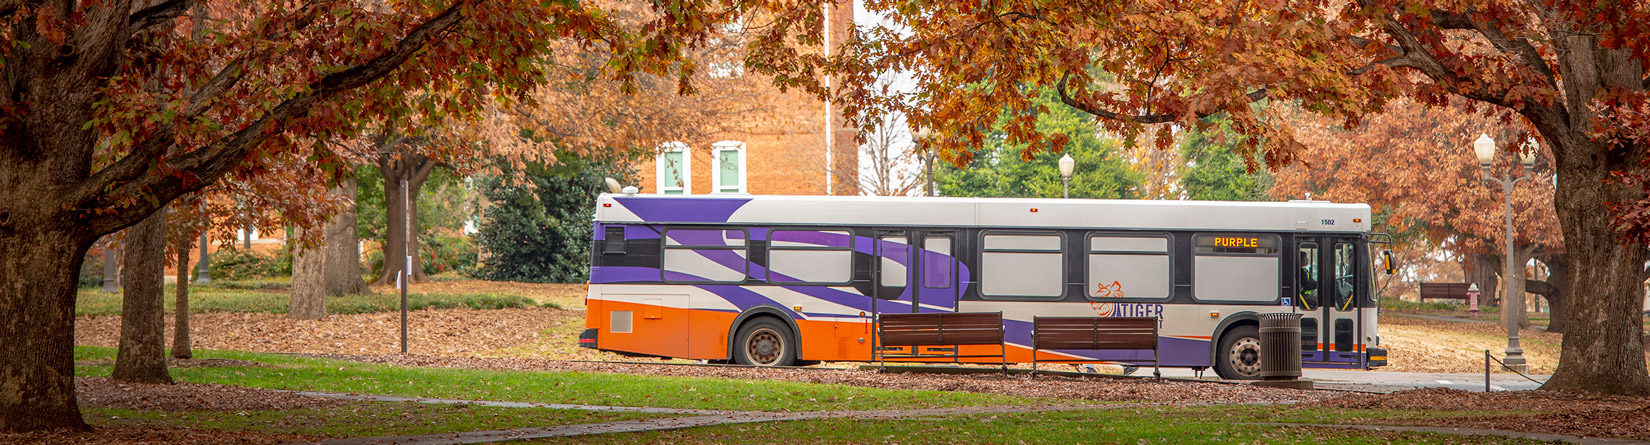 A Clemson CAT bus pulls up to a stop among trees flush with fall colors